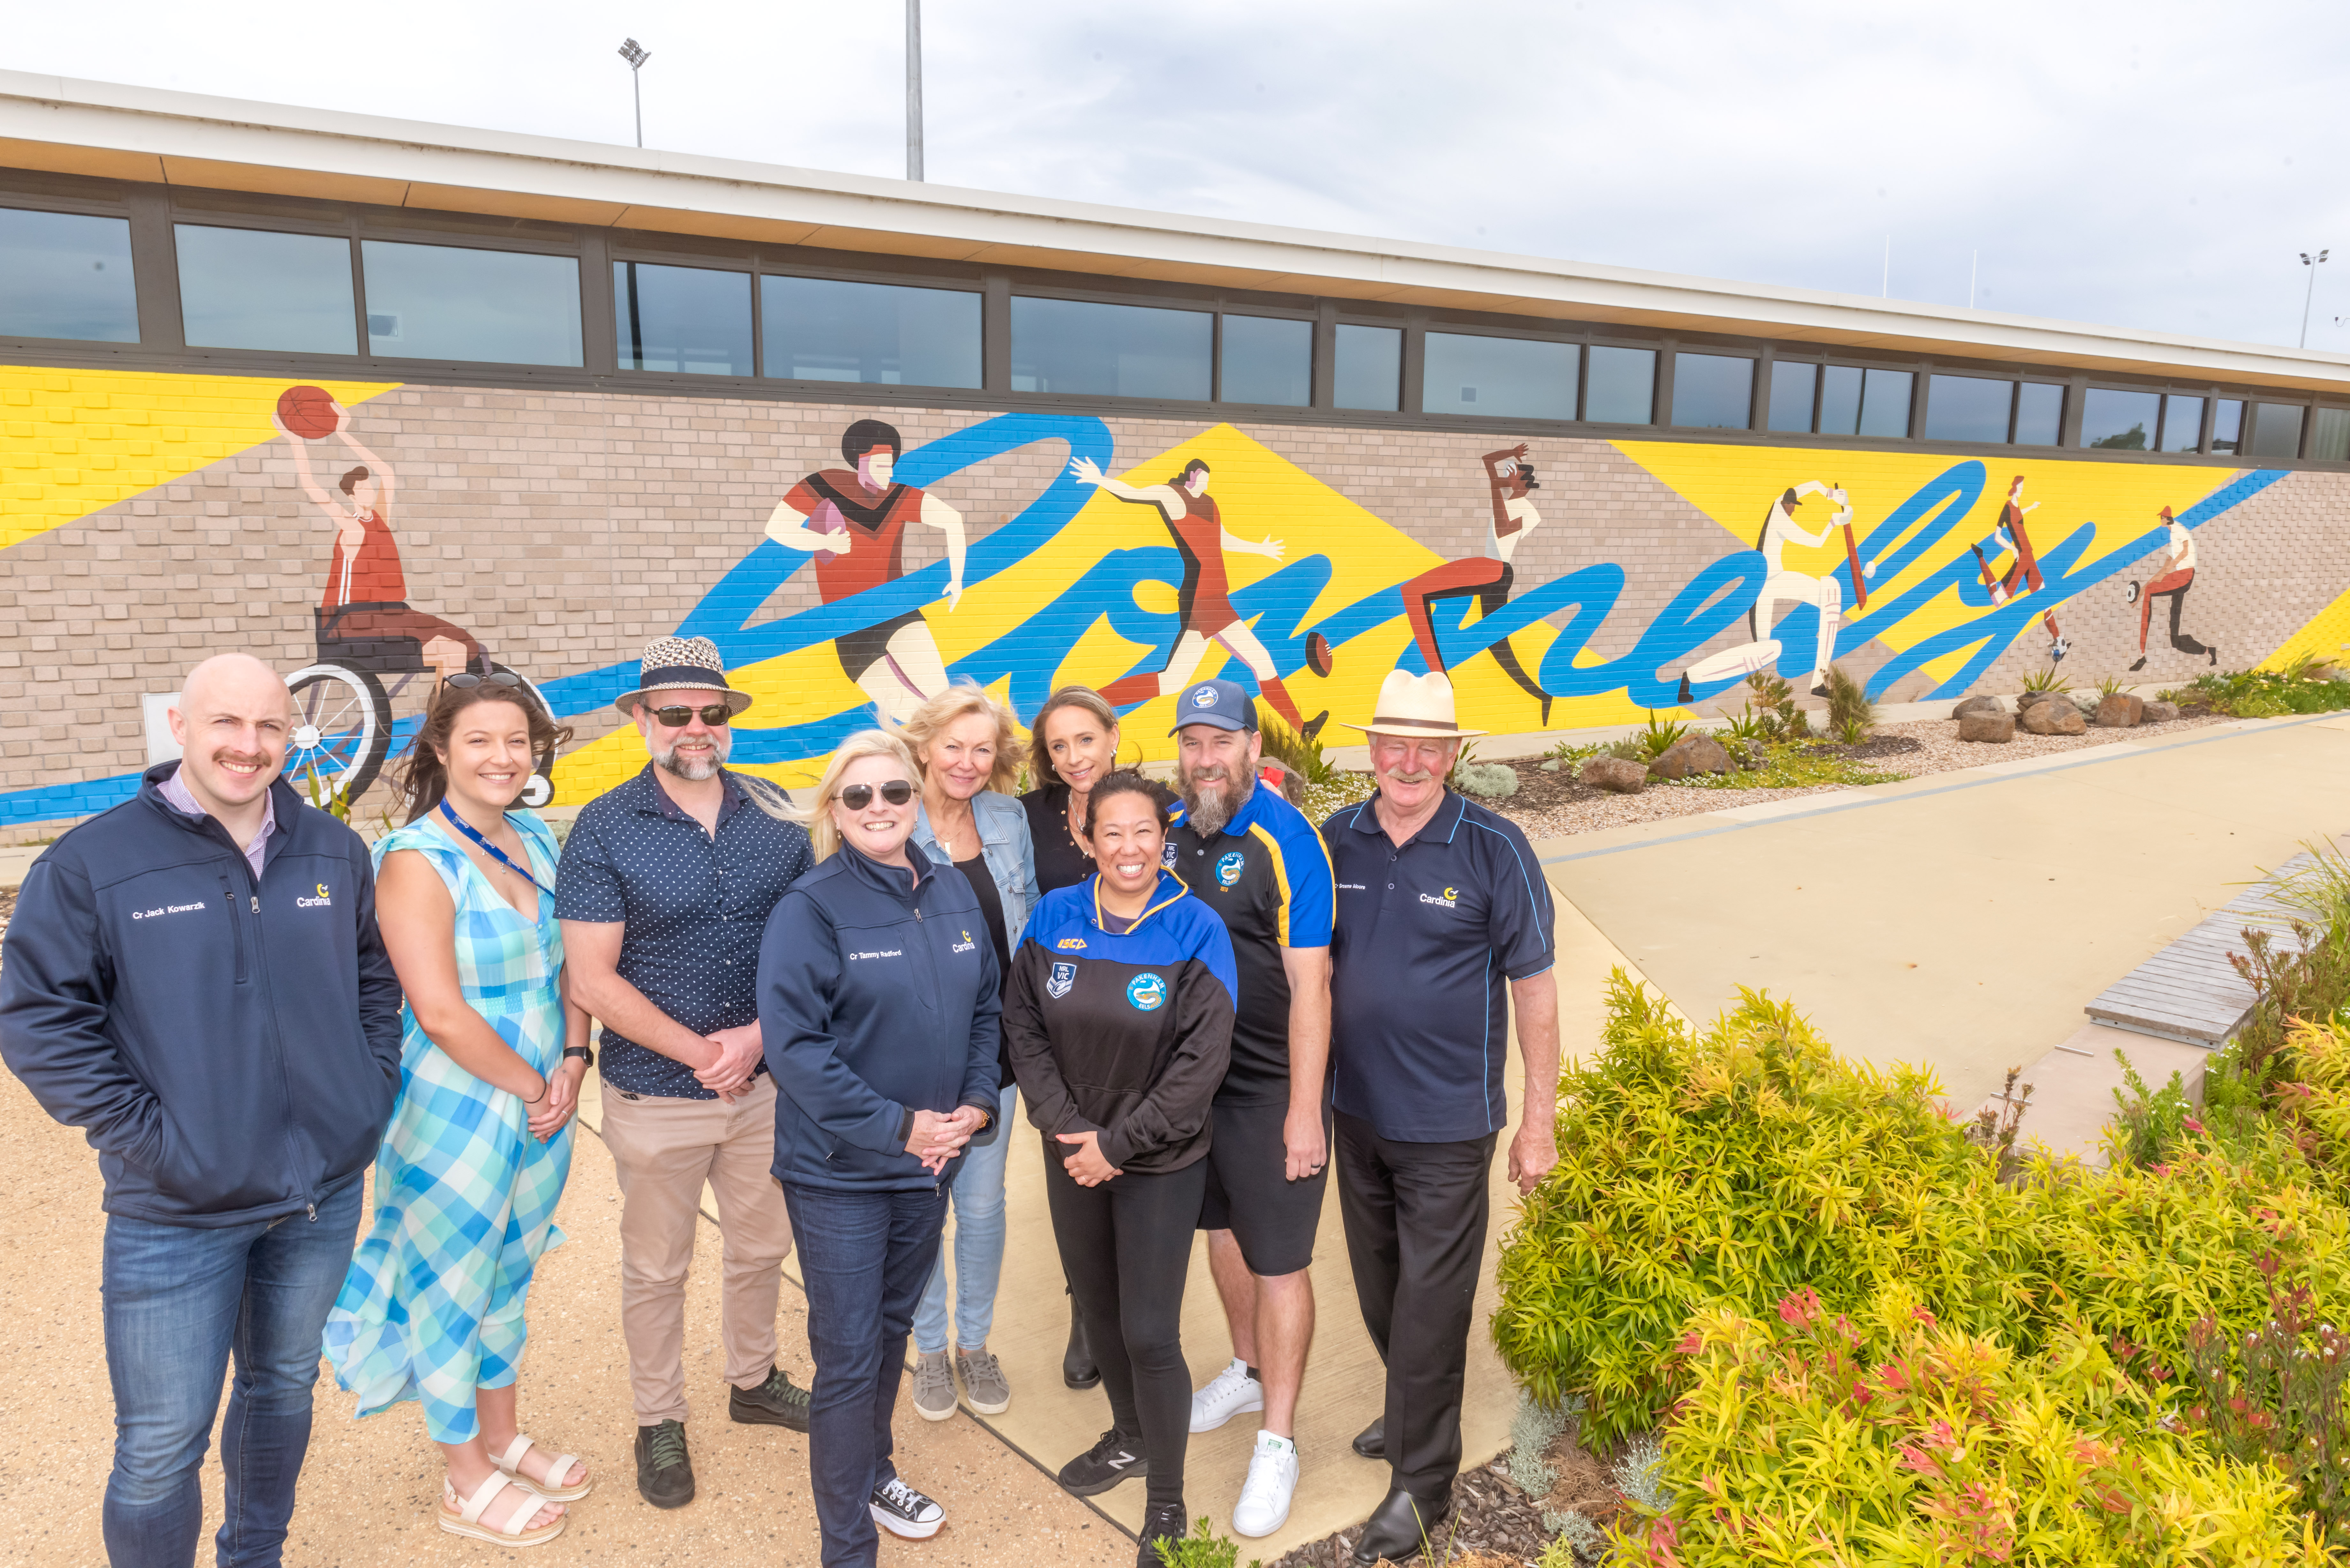 Cardinia Shire Mayor Cr Tammy Radford attending the Comely Banks mural unveiling, alongside Cr Jack Kowarzik, Cr Jeff Springfield, Cr Graeme Moore, Melbourne Murals and community members.